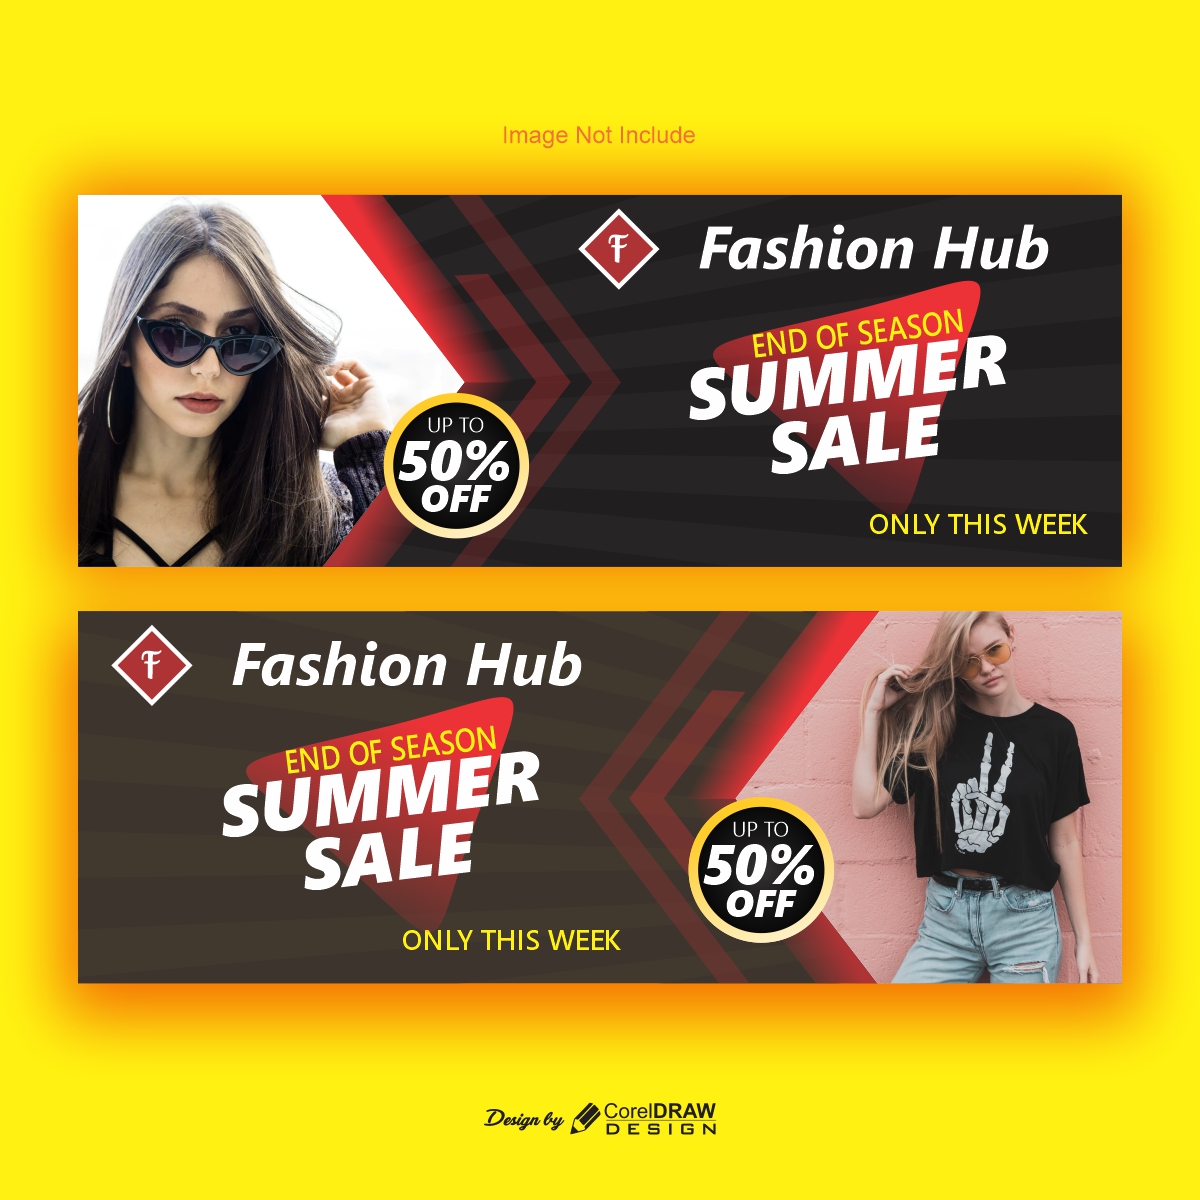 Free 4692+ Mockup Banner Cdr Yellowimages Mockups